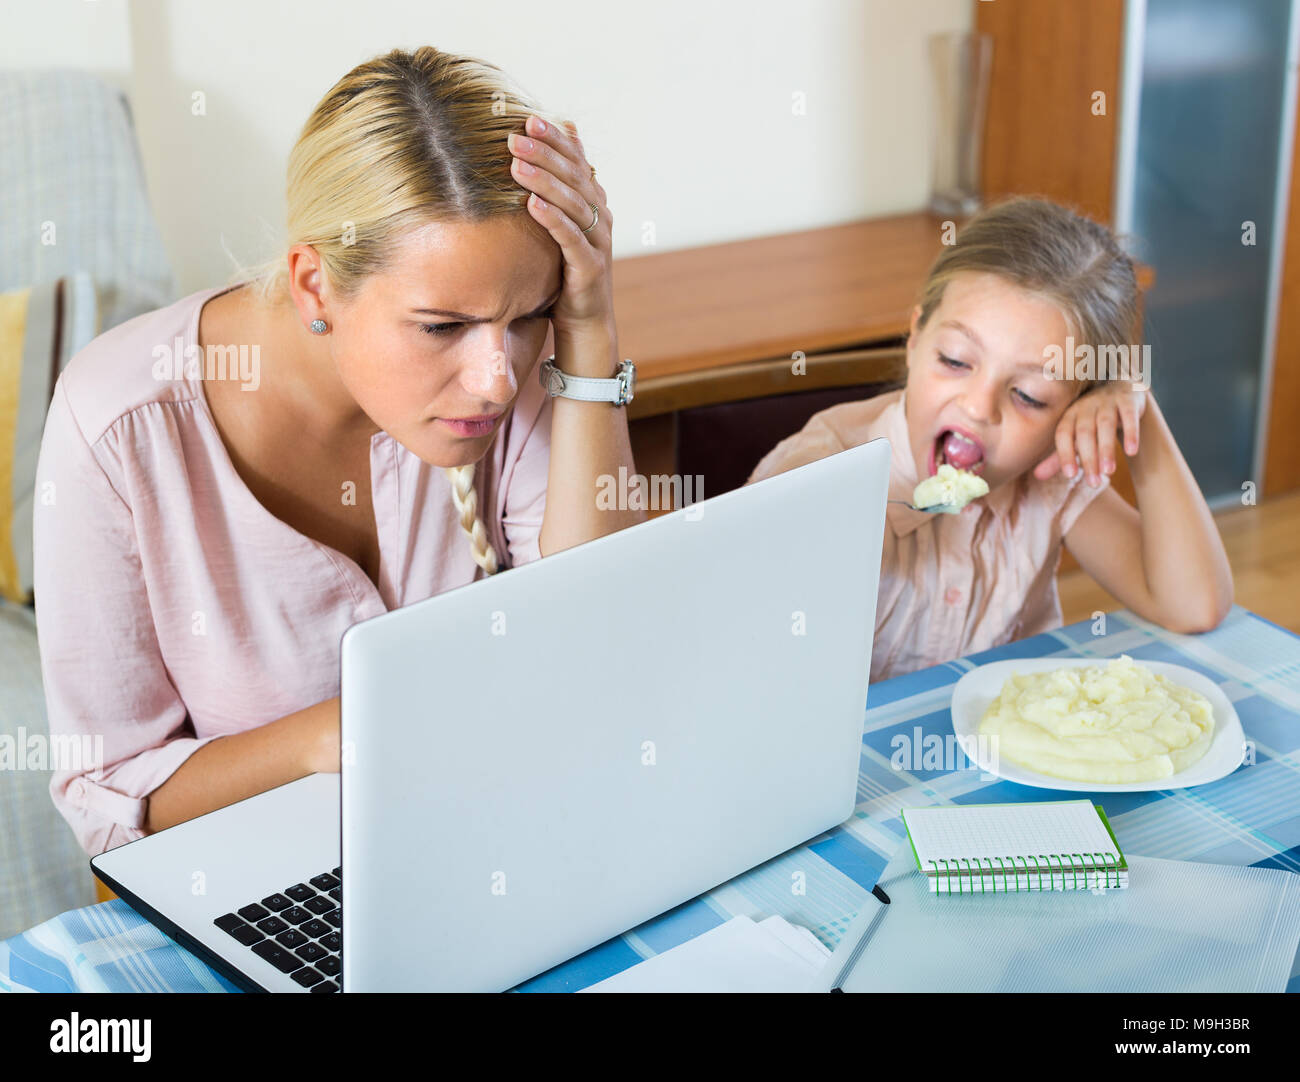 Tired businesswoman irritated as little daughter diverts her from work Stock Photo